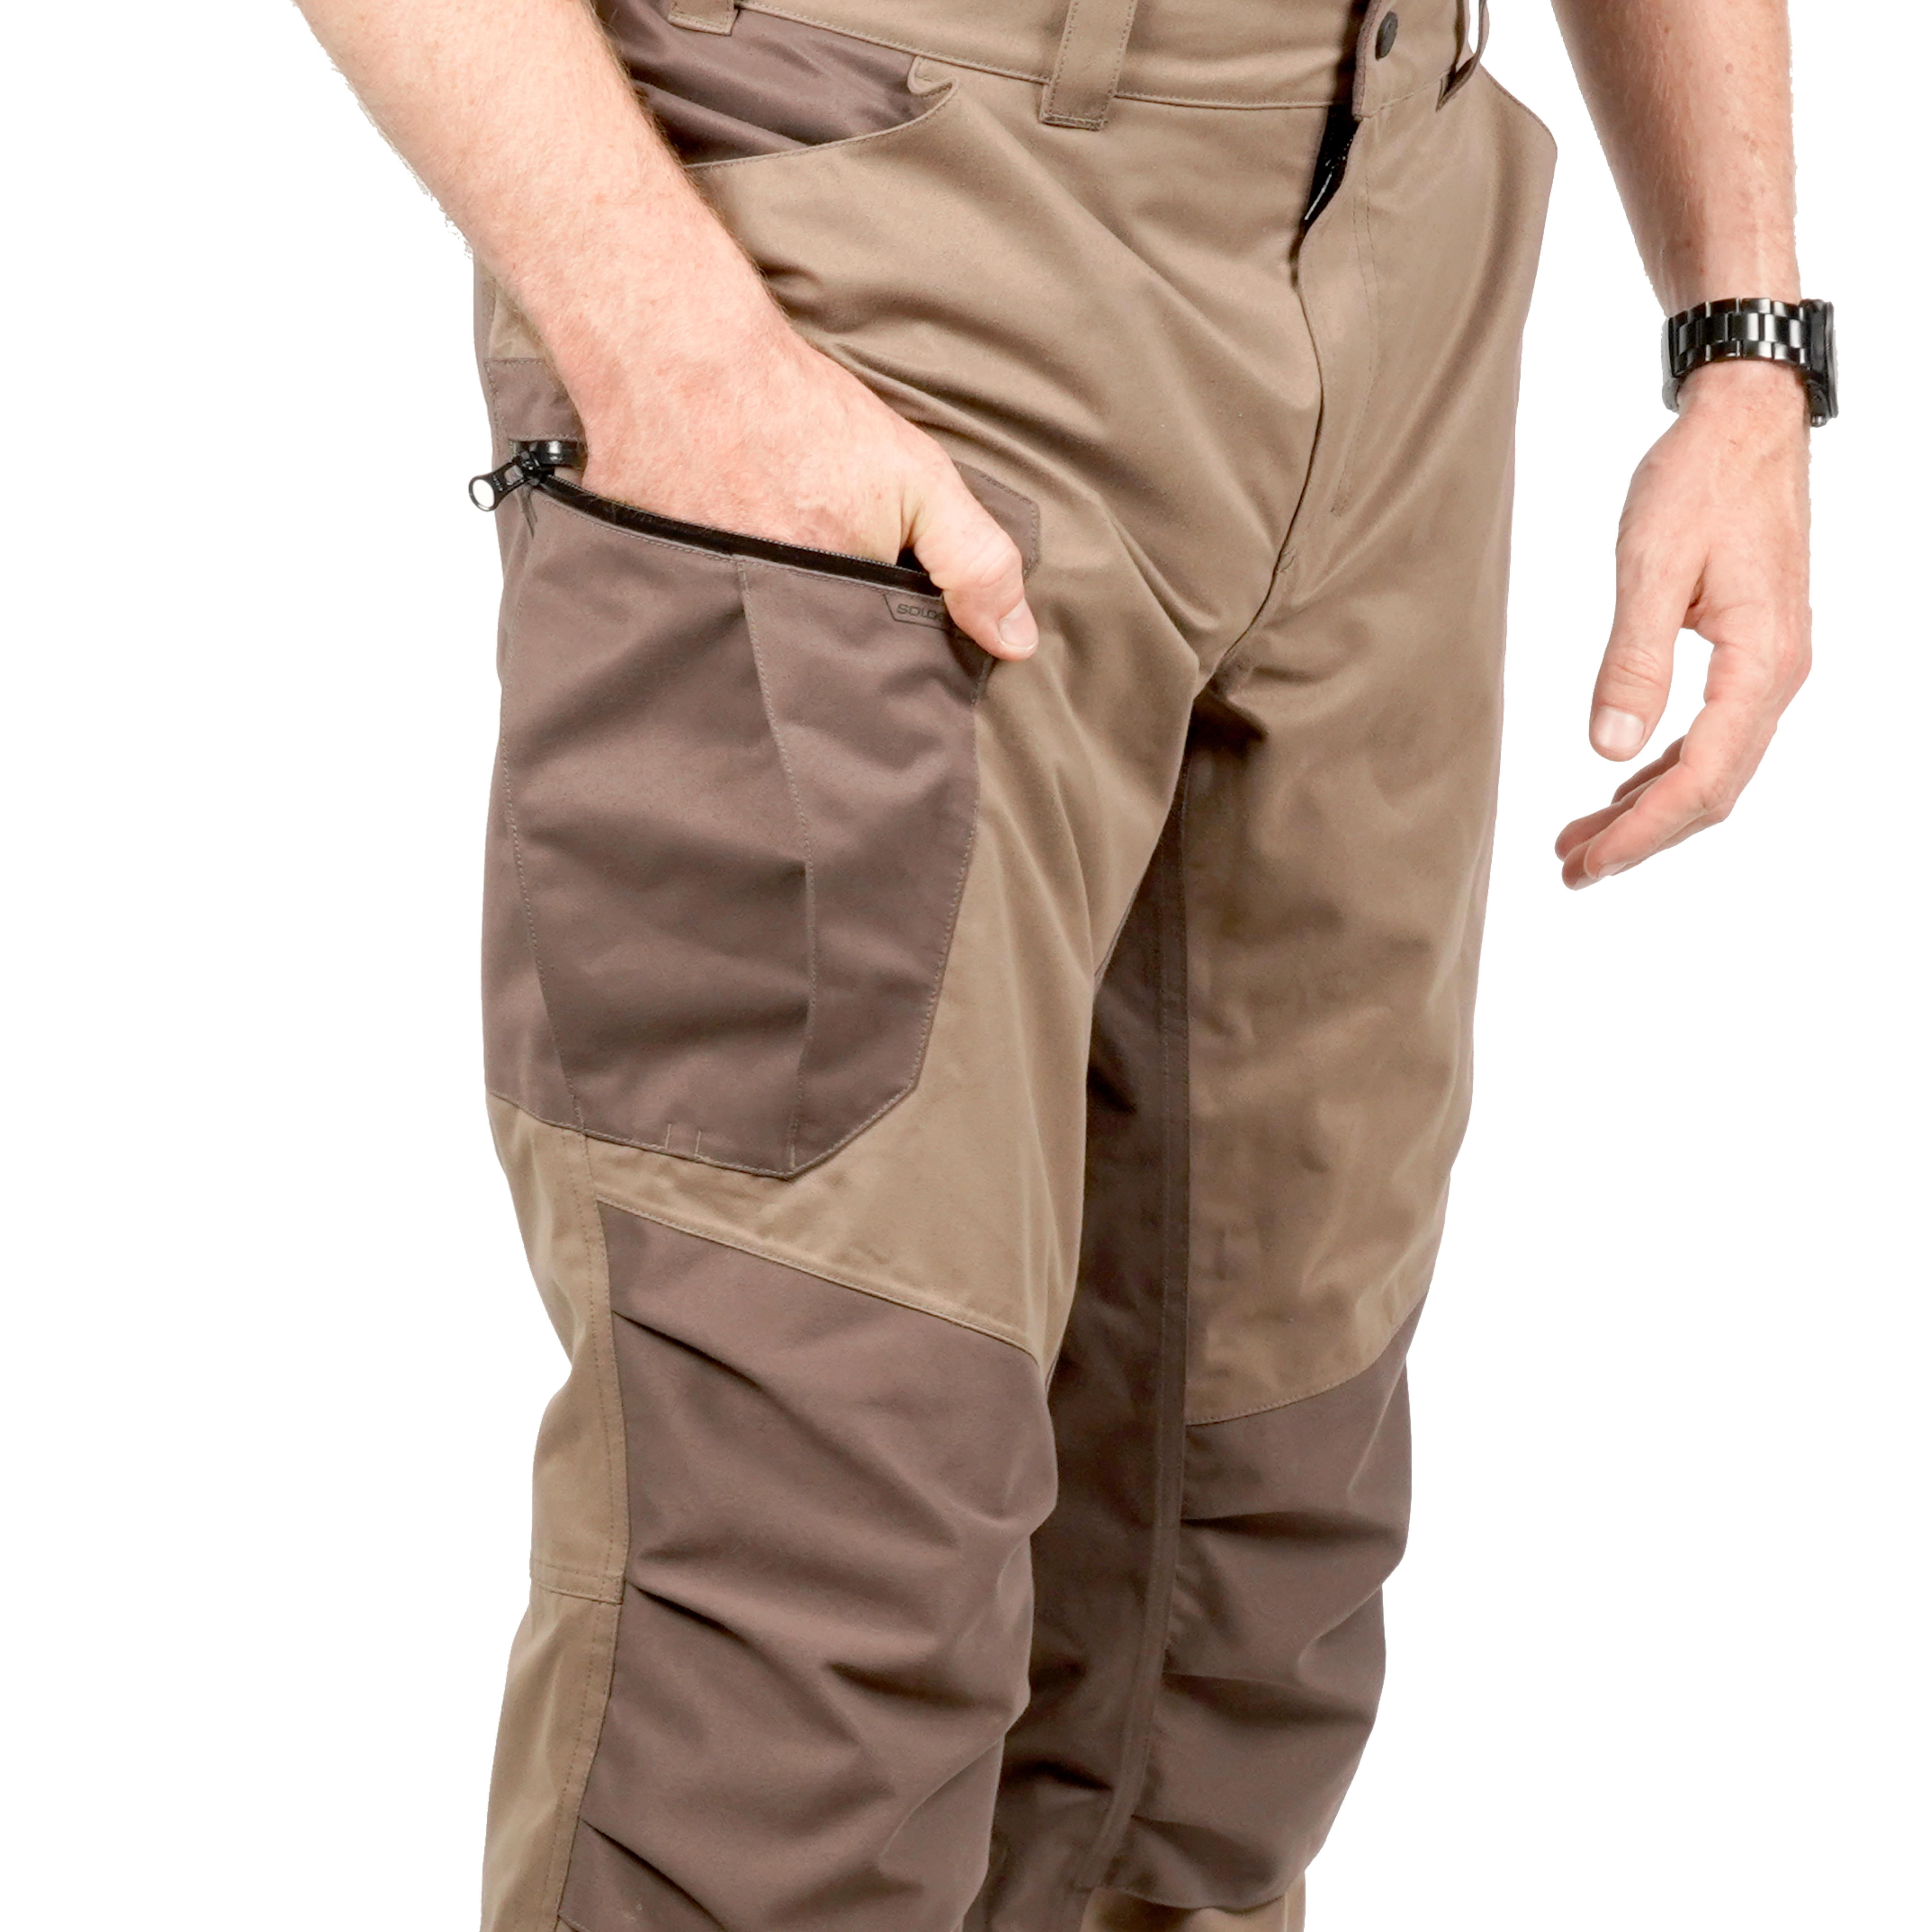 Milano Polycotton Waterproof Extra Long Outdoor Trousers Hunting Shooting  Olive  eBay